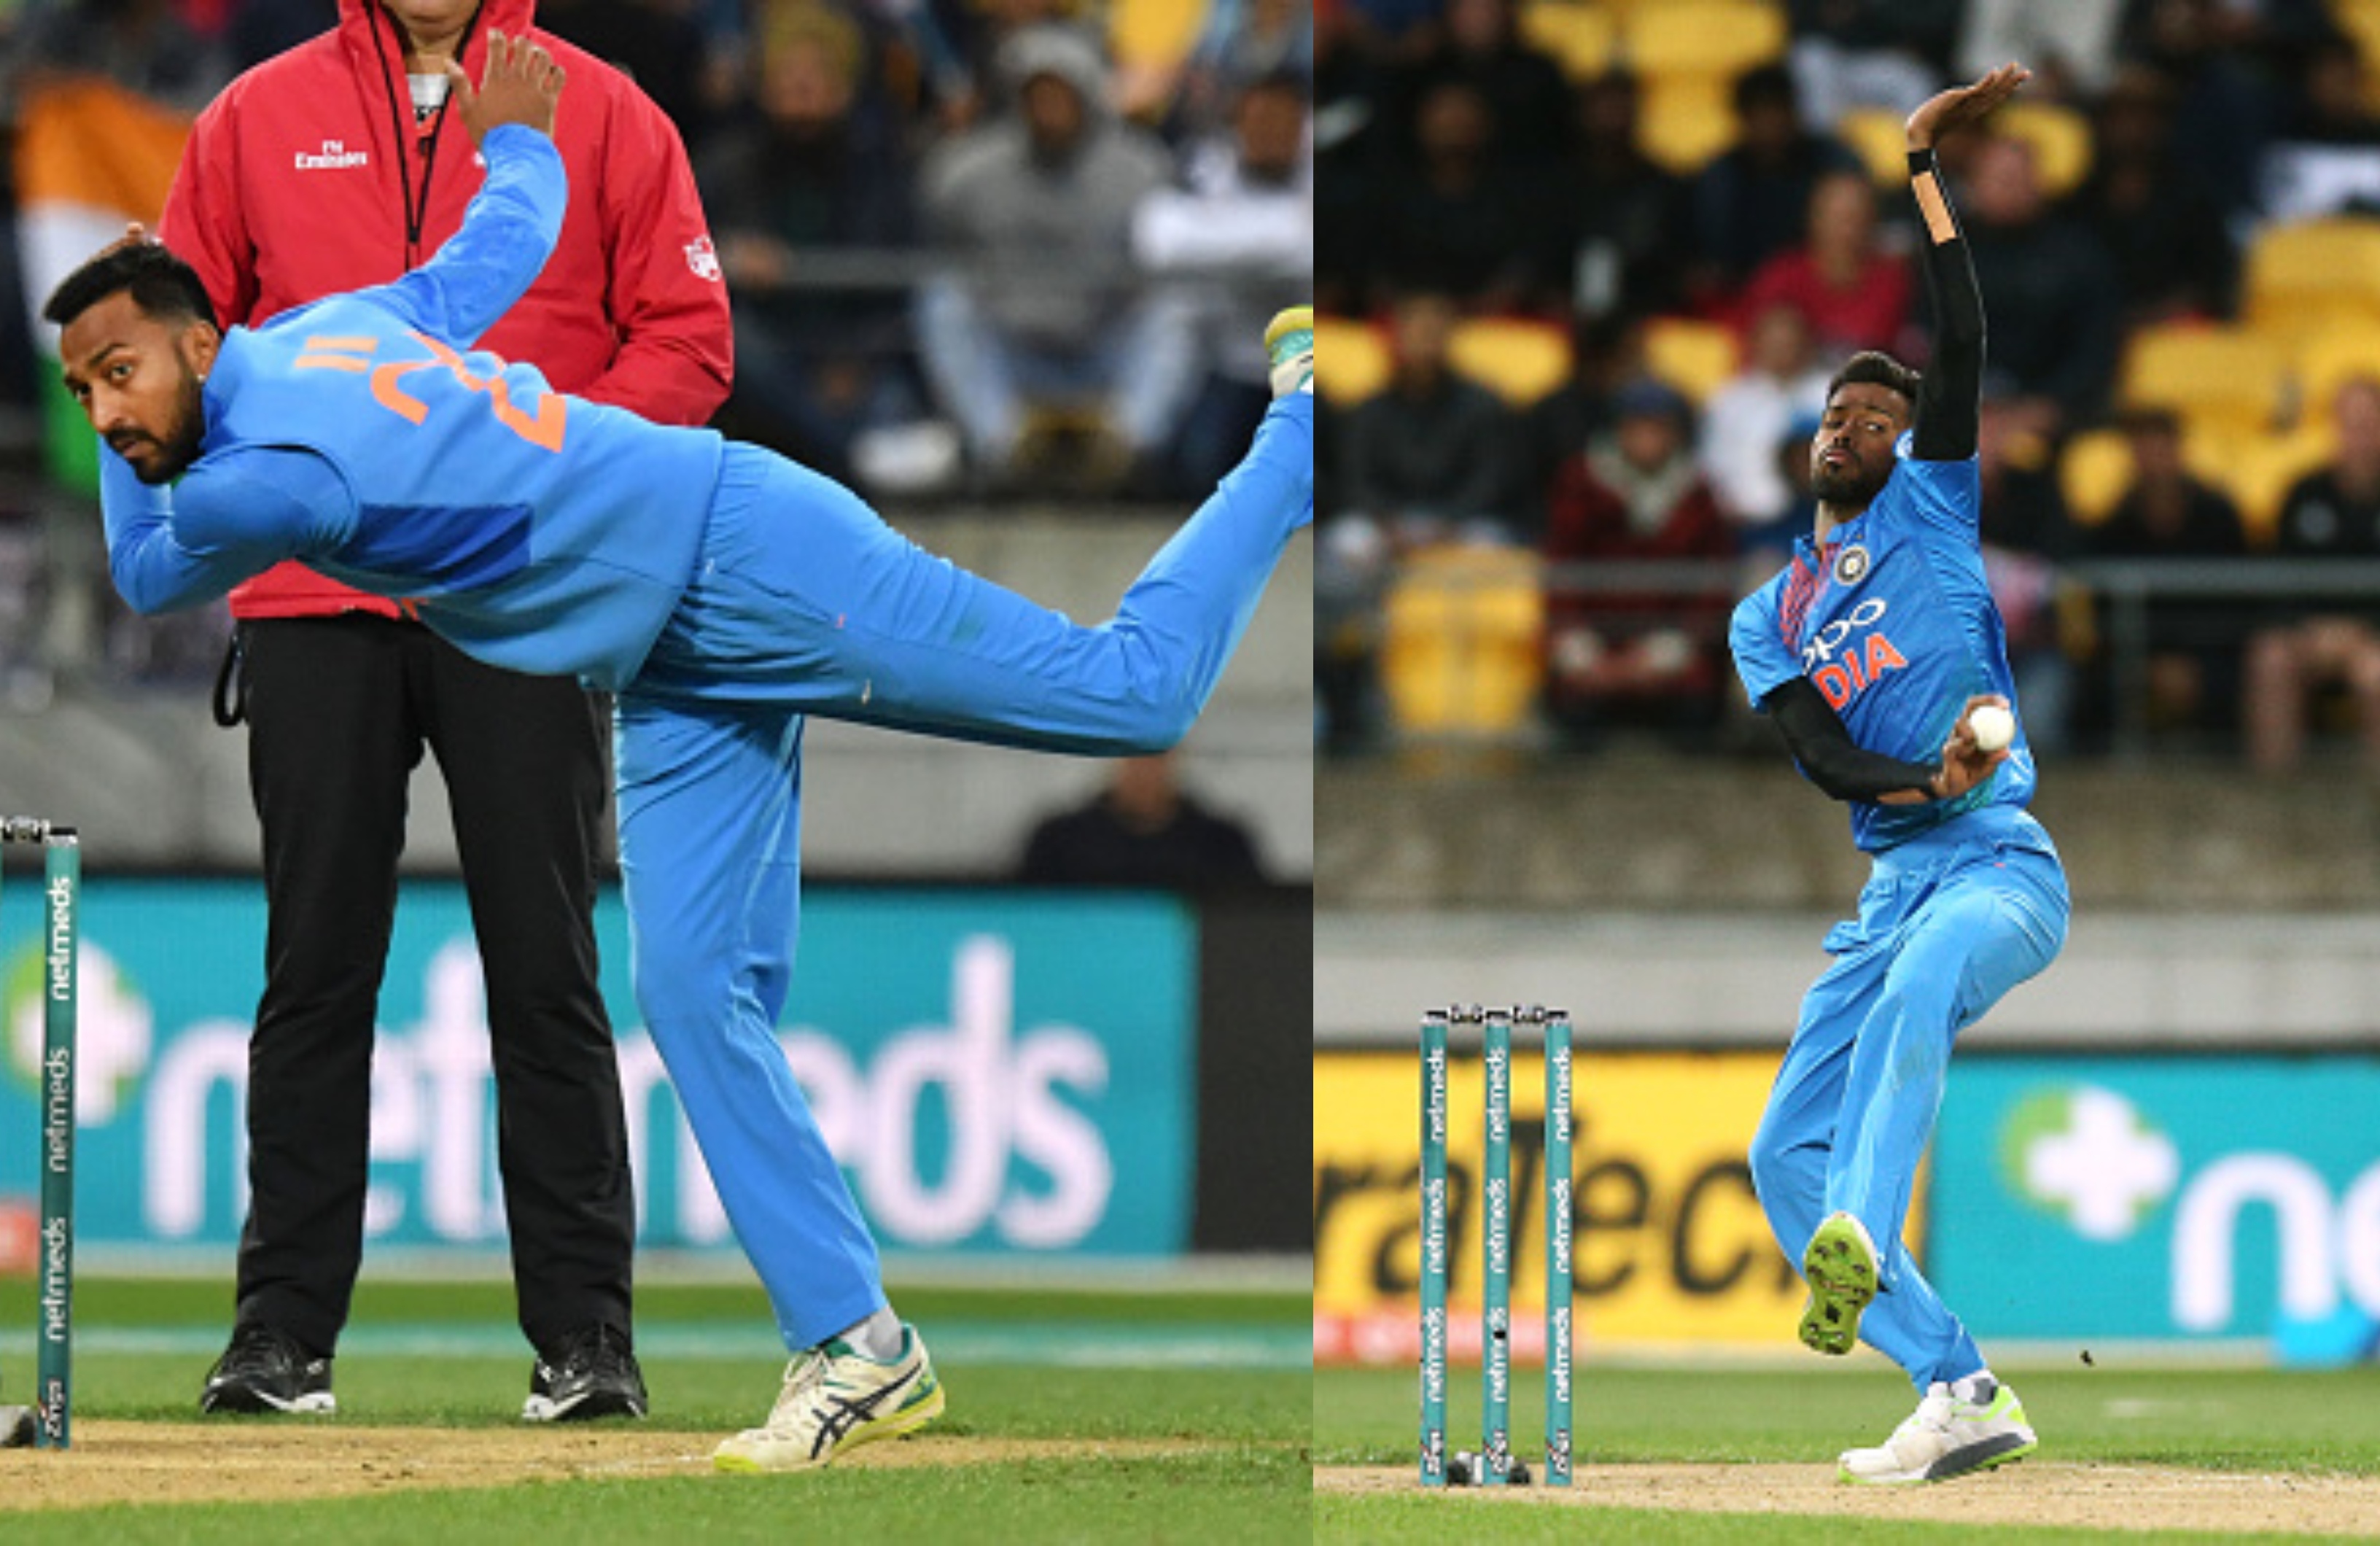 Hardik and Krunal played for the first time at international level for India in Wellington | Getty Images